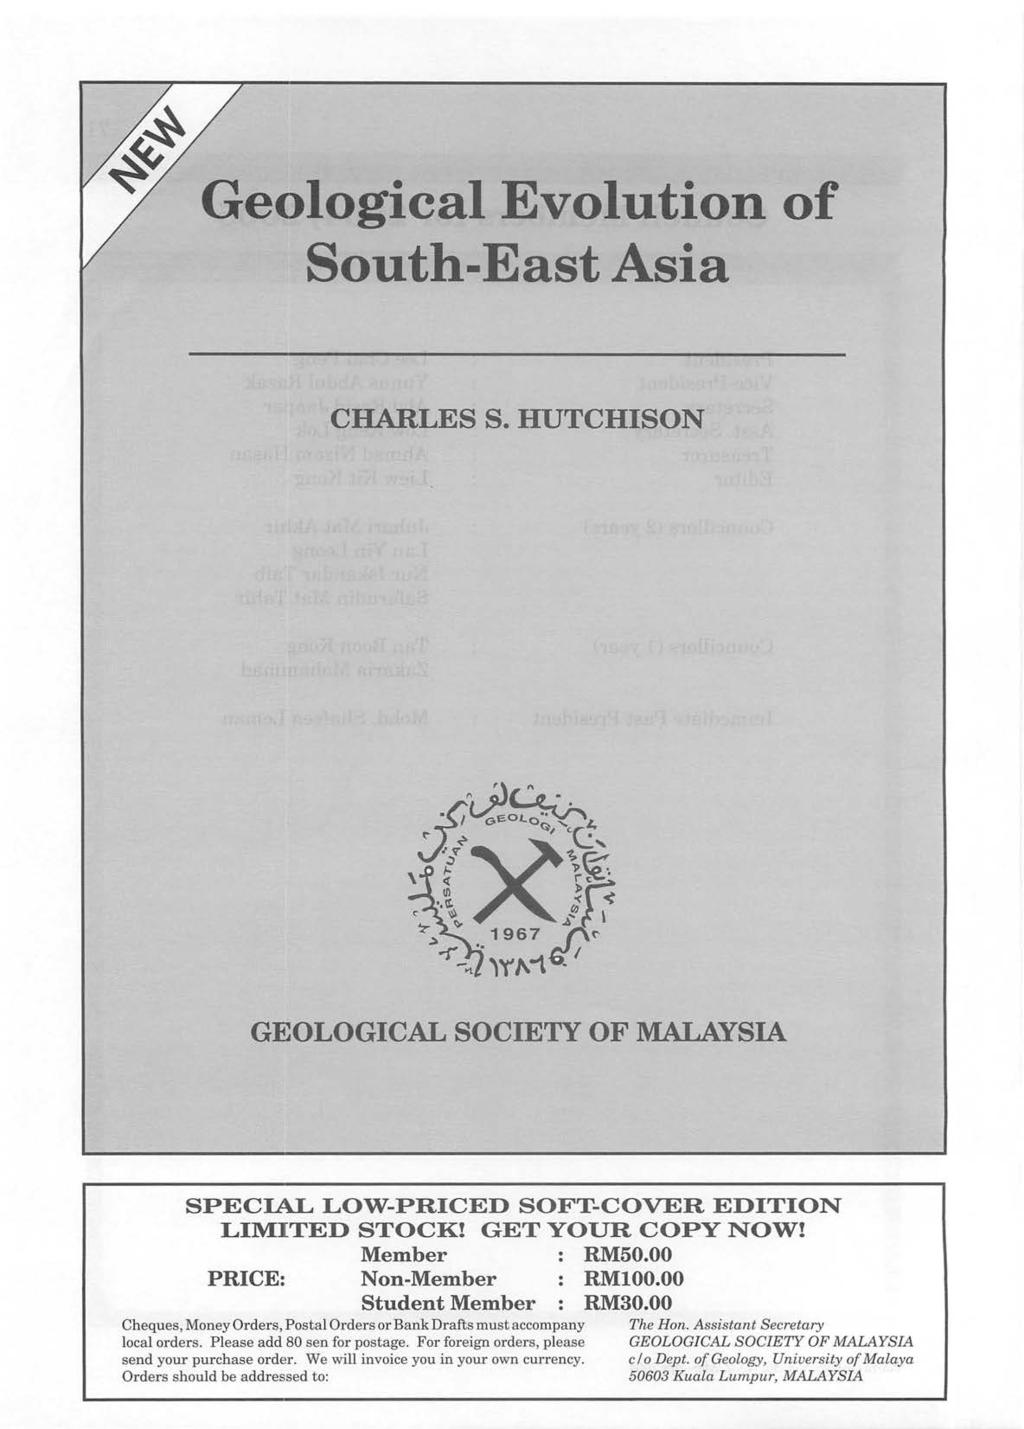 Geological Evolution of South-East Asia CHARLES S. HUTCHISON GEOLOGICAL SOCIETY OF MALAYSIA SPECIAL LOW-PRICED SOFT-COVER EDITION LIMITED STOCK! GET YOUR COPY NOW! Member RM50.